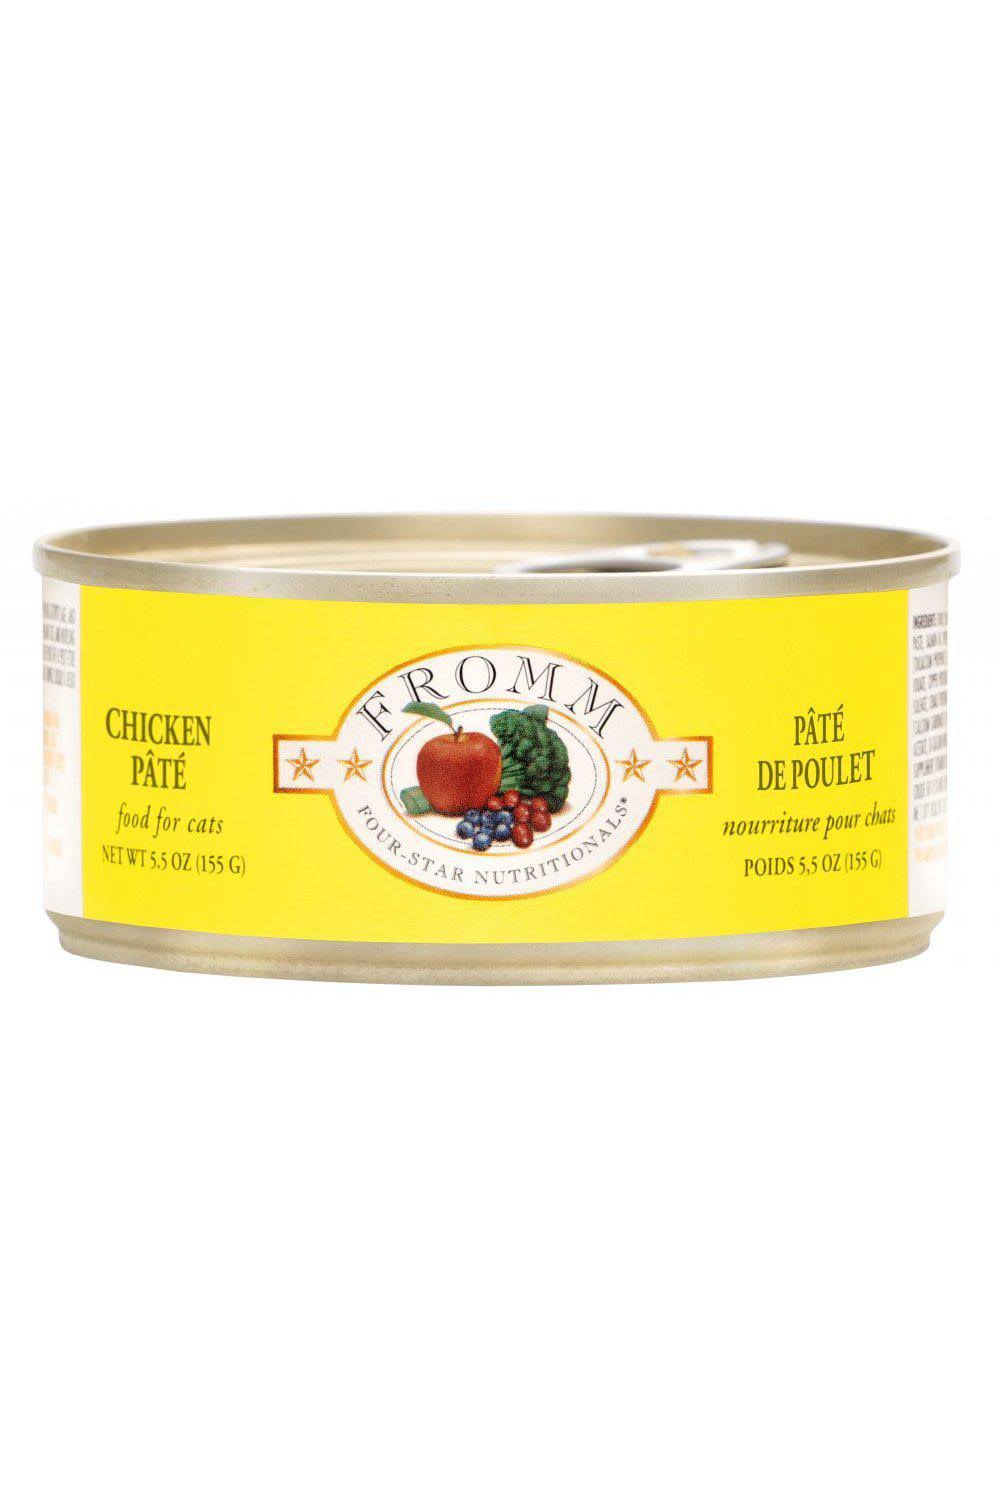 Fromm 5.5 oz Four-Star Chicken Pate Cat Food